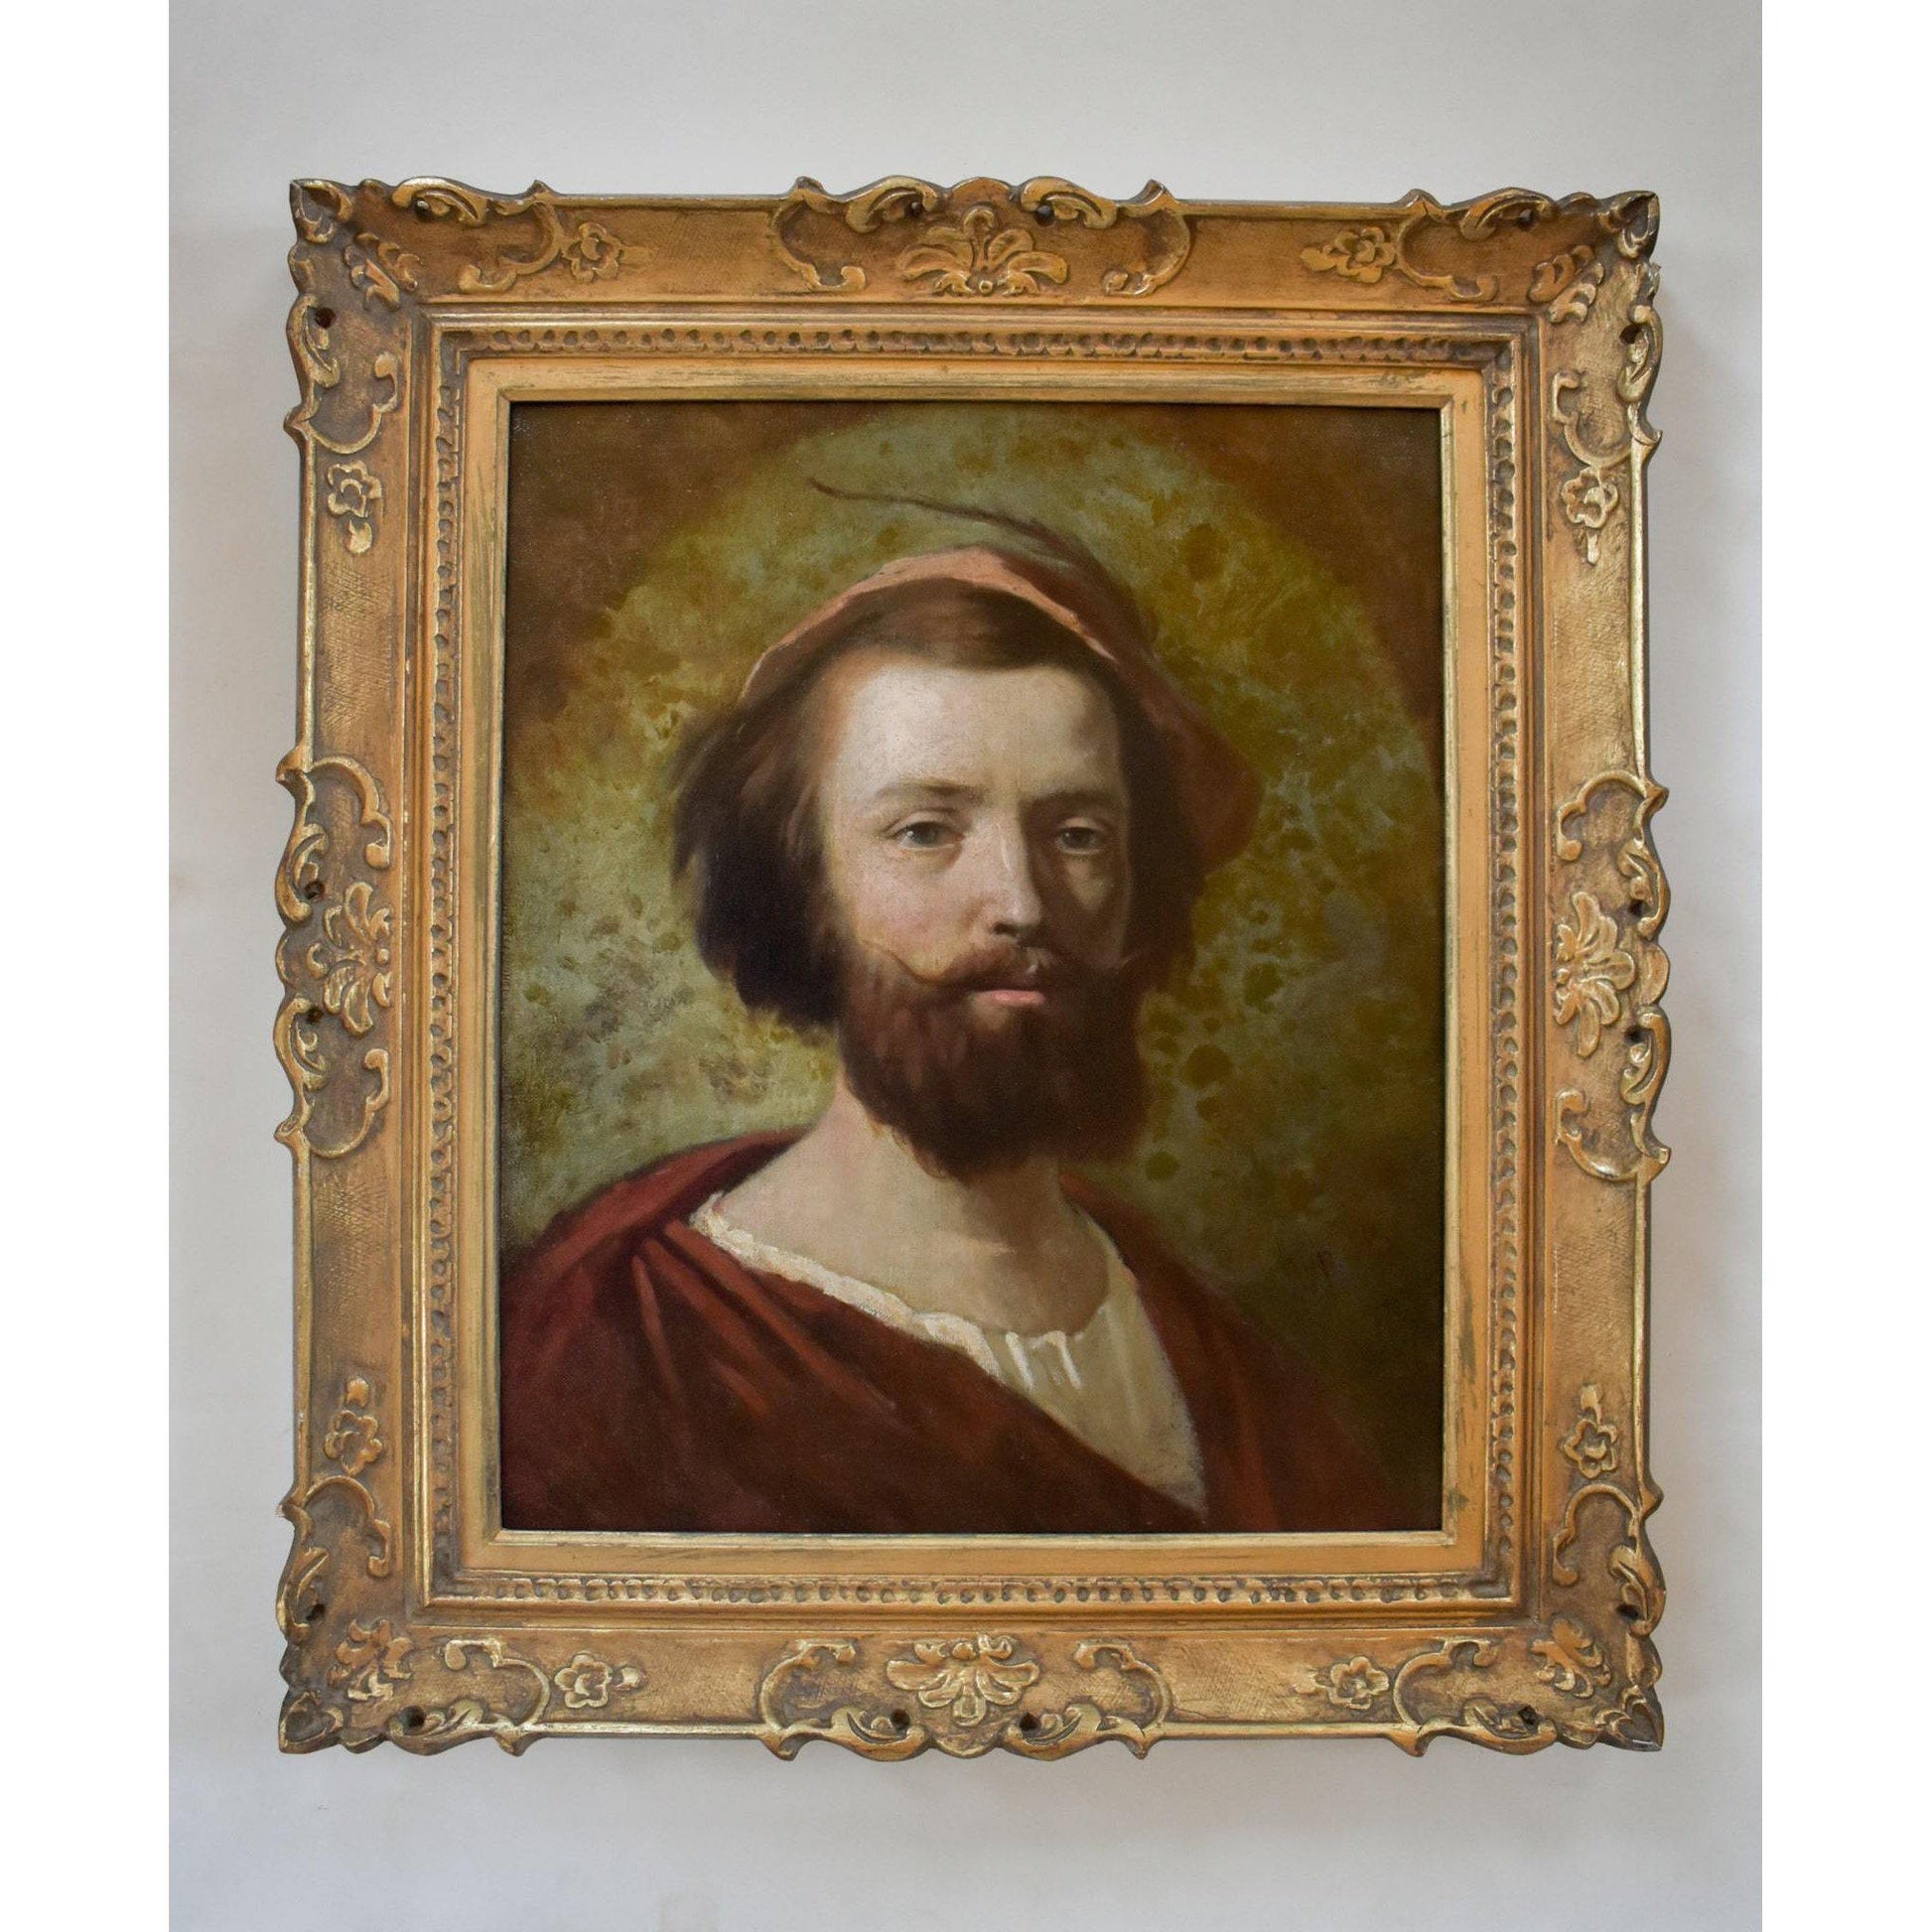 Antique portrait painting bearded man medieval clothing original 1865 by Hippolyte Bellange for sale at Winckelmann Gallery